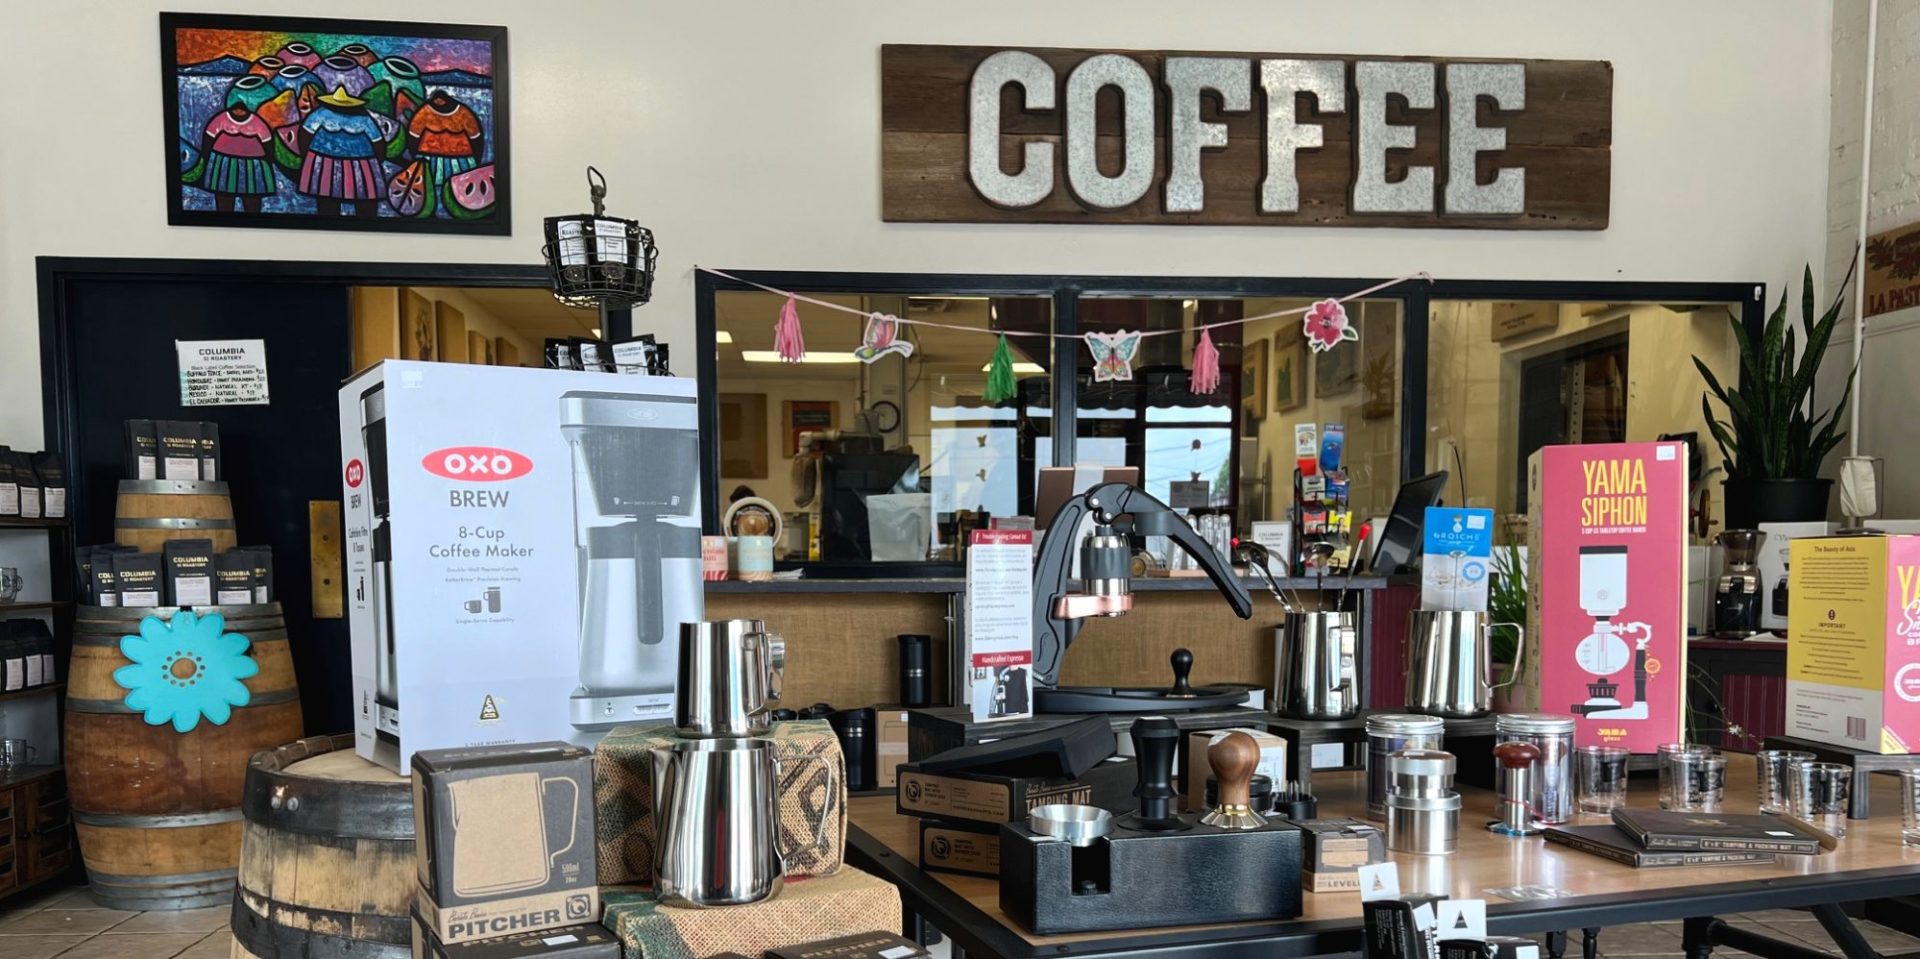 The interior of Columbia Street Roastery has a wooden sign that reads COFFEE along the back wall. Windows show a peek at the roastery, and the tables in the foreground offer a variety of coffee makers, pitchers, and books for sale.